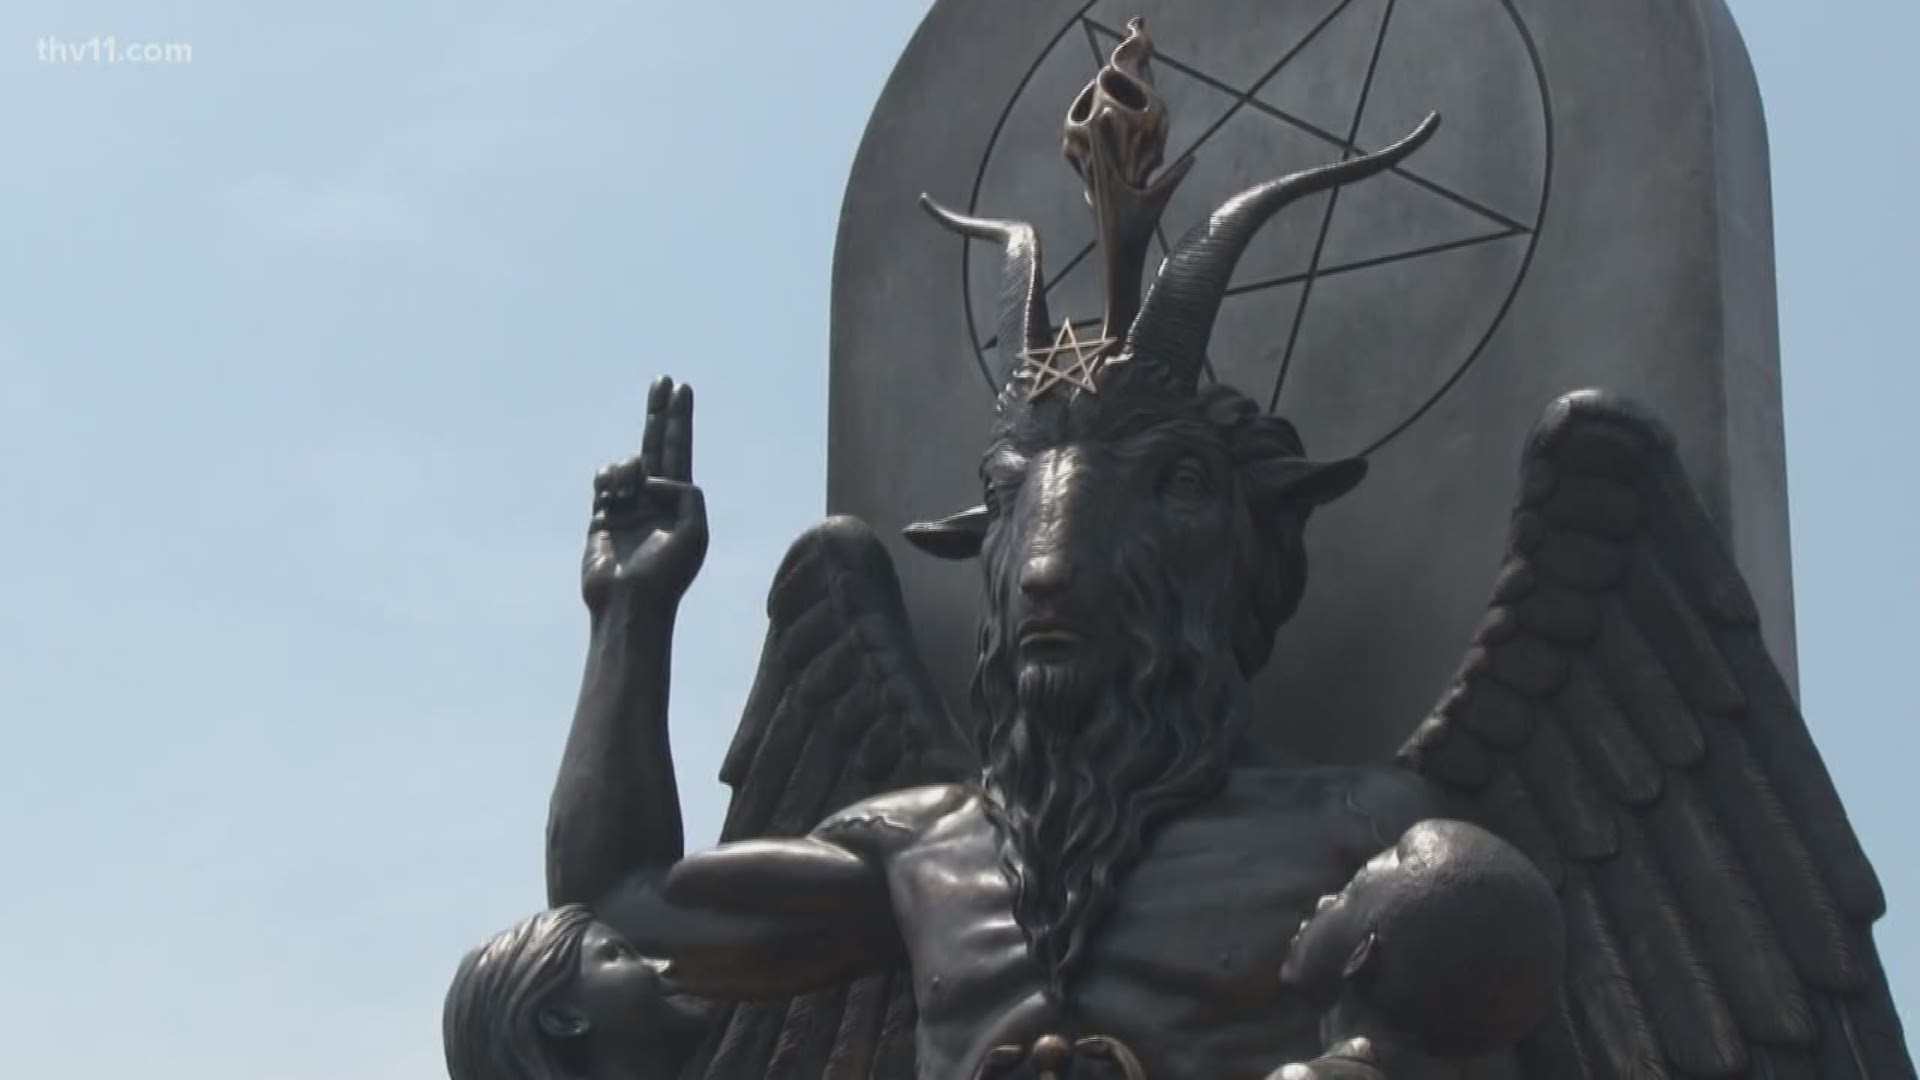 The rights of religions, non-religions and anti-religions are debated as a self-described Satanic group brings a replica of a statue they want see placed on the same grounds as the state's 10 Commandments monument.